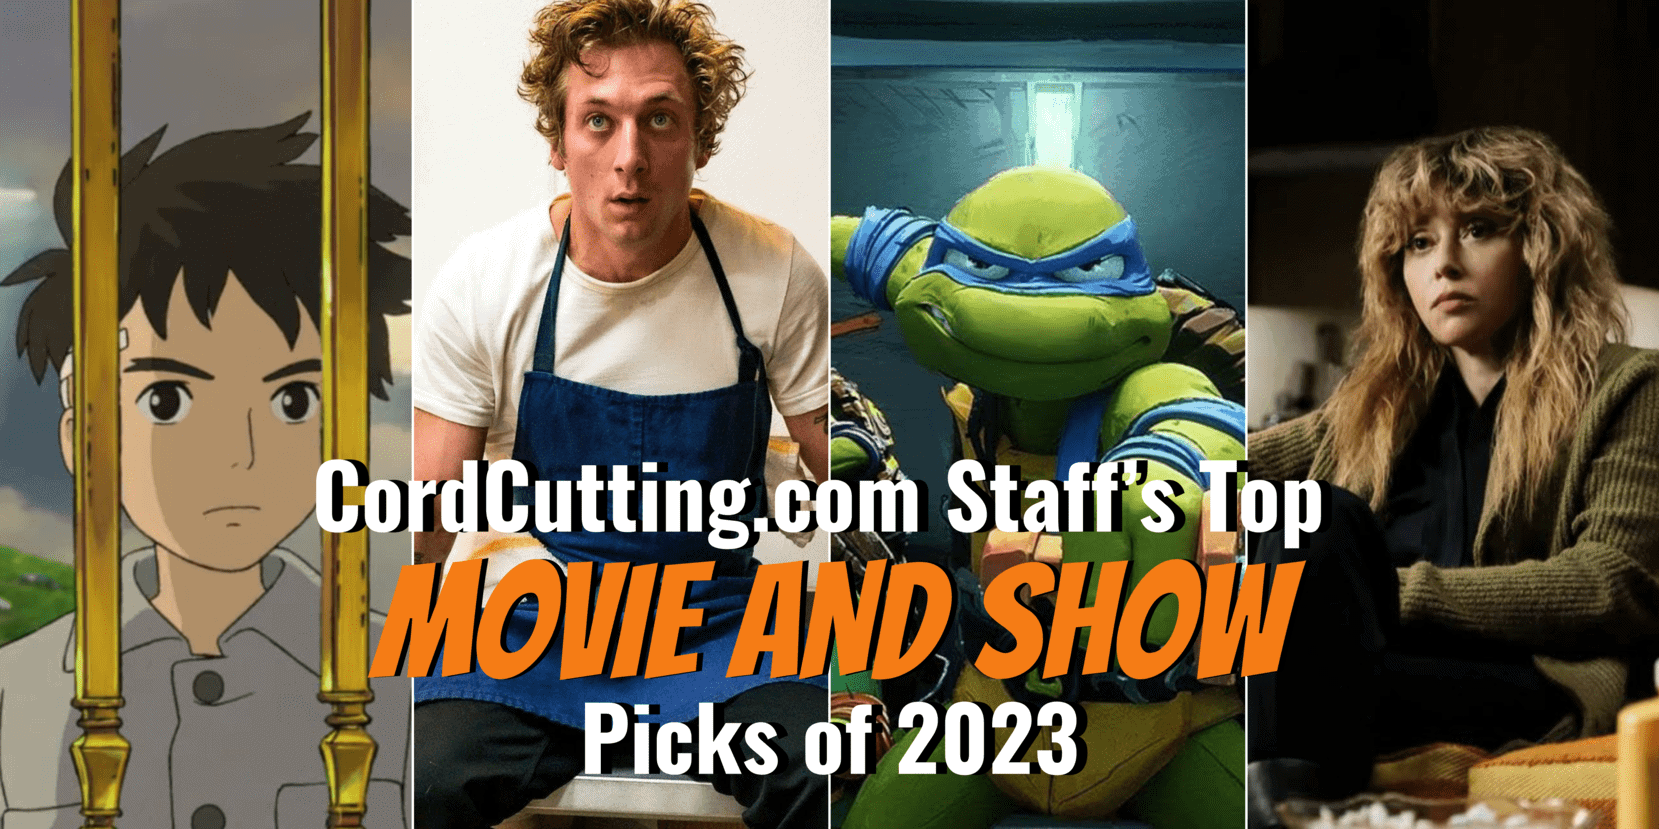 CordCutting.com Staff’s Top Movie and Show Picks of 2023